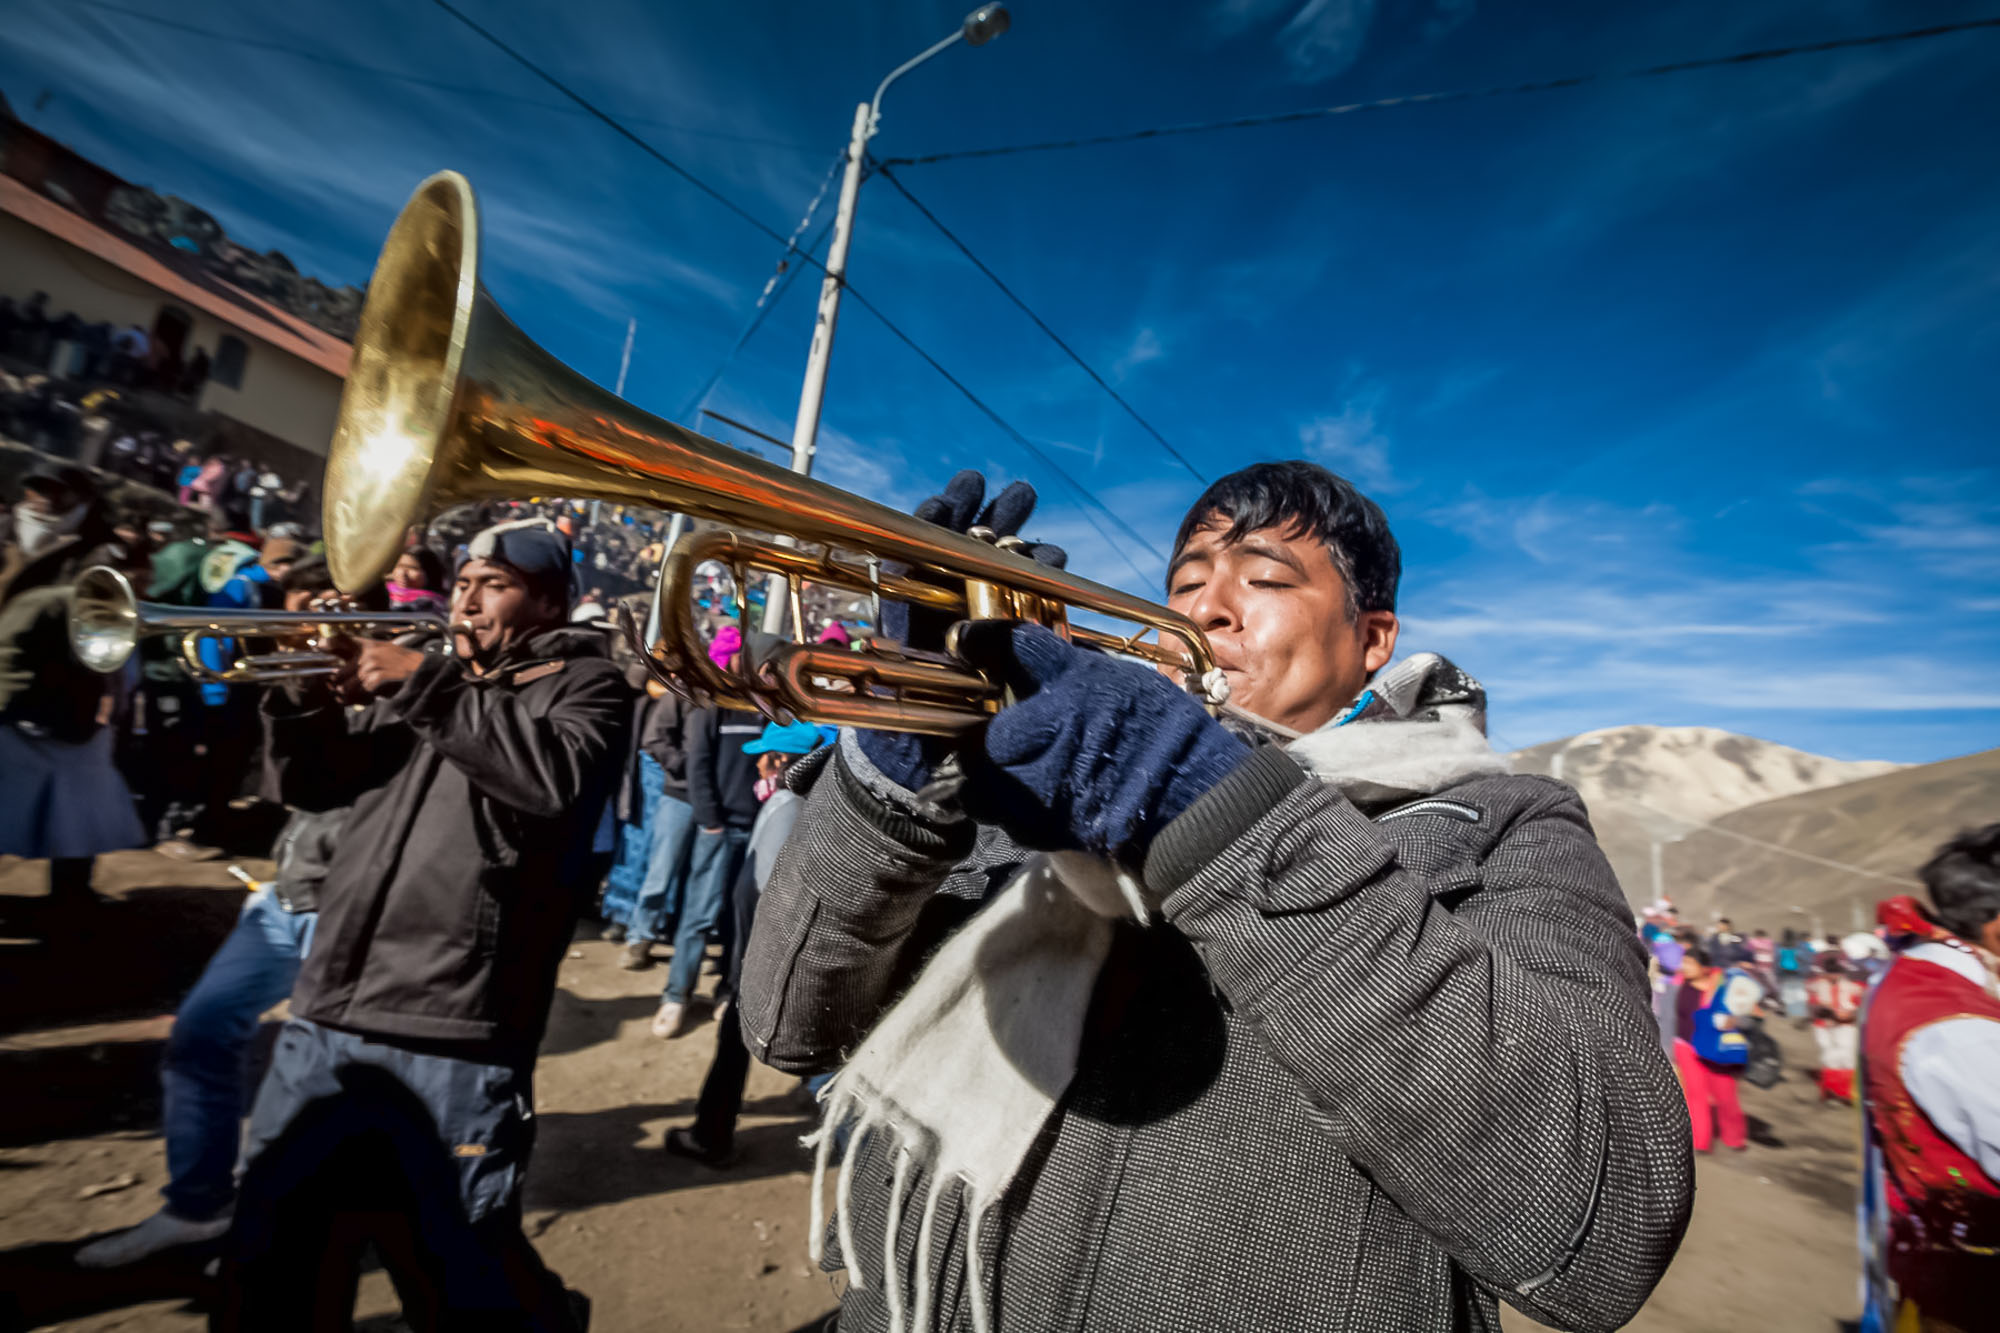 Trumpet player in a street parade we watched on a Peru adventure tour